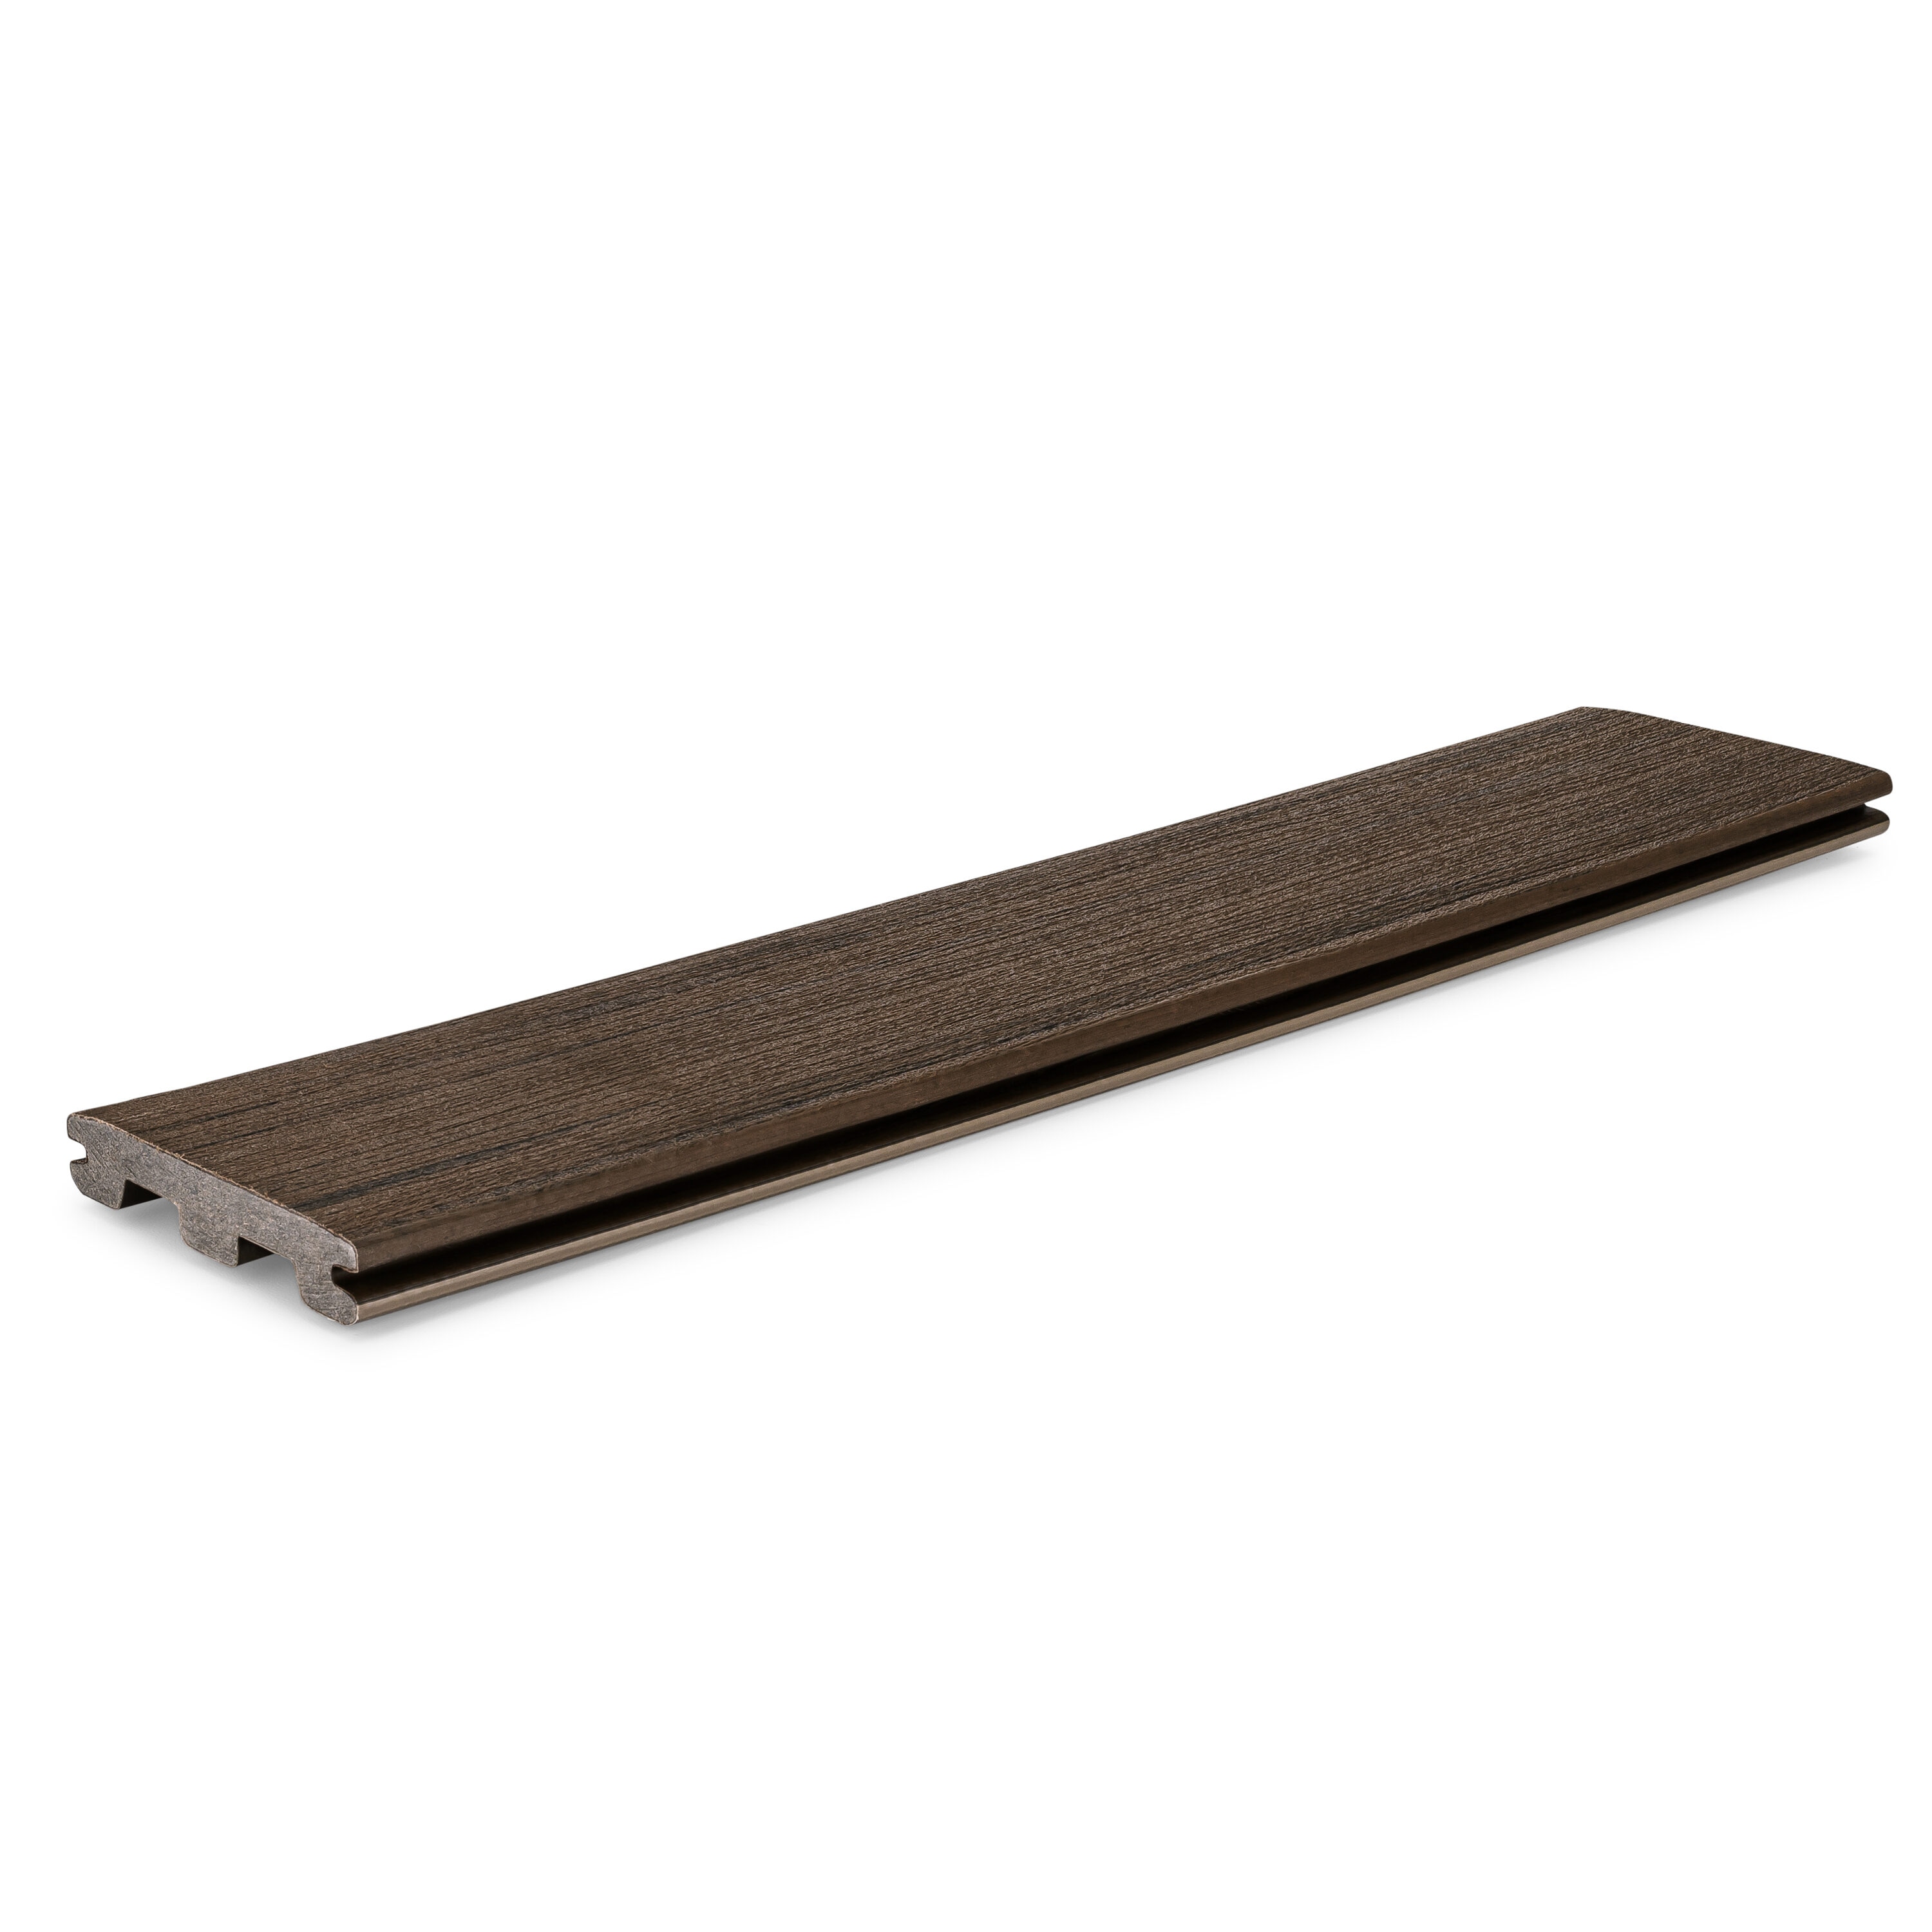 Prime+ 5/4-in x 6-in x 20-ft Dark Cocoa Grooved Composite Deck Board in Brown | - TimberTech PRGV5420DC